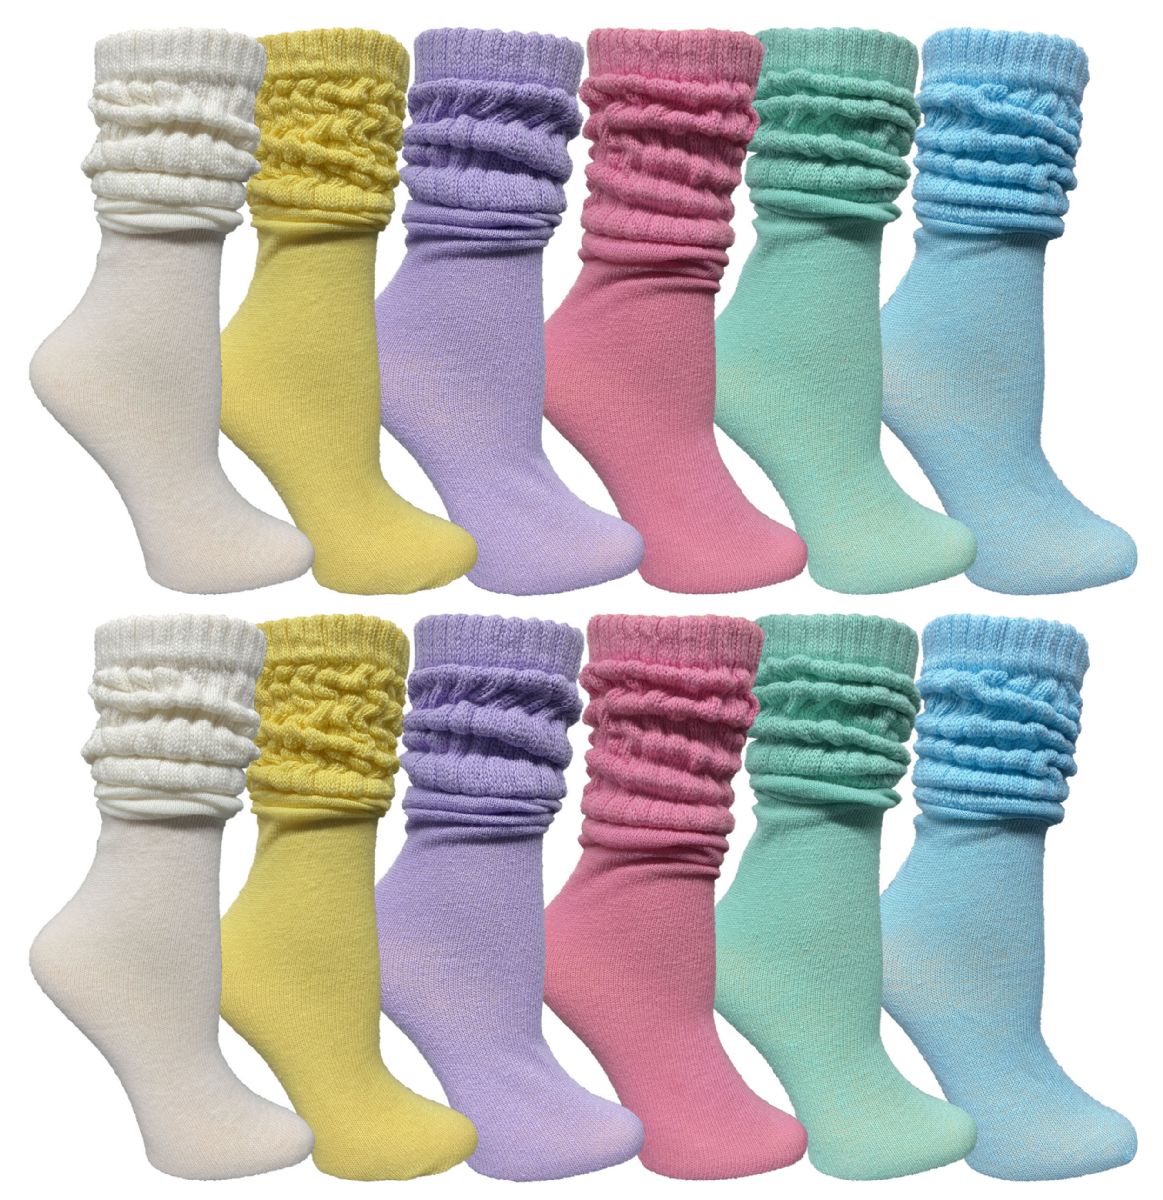 240 Wholesale Yacht & Smith Slouch Socks For Women, Assorted Pastel Size 9-11 - Womens Crew Sock